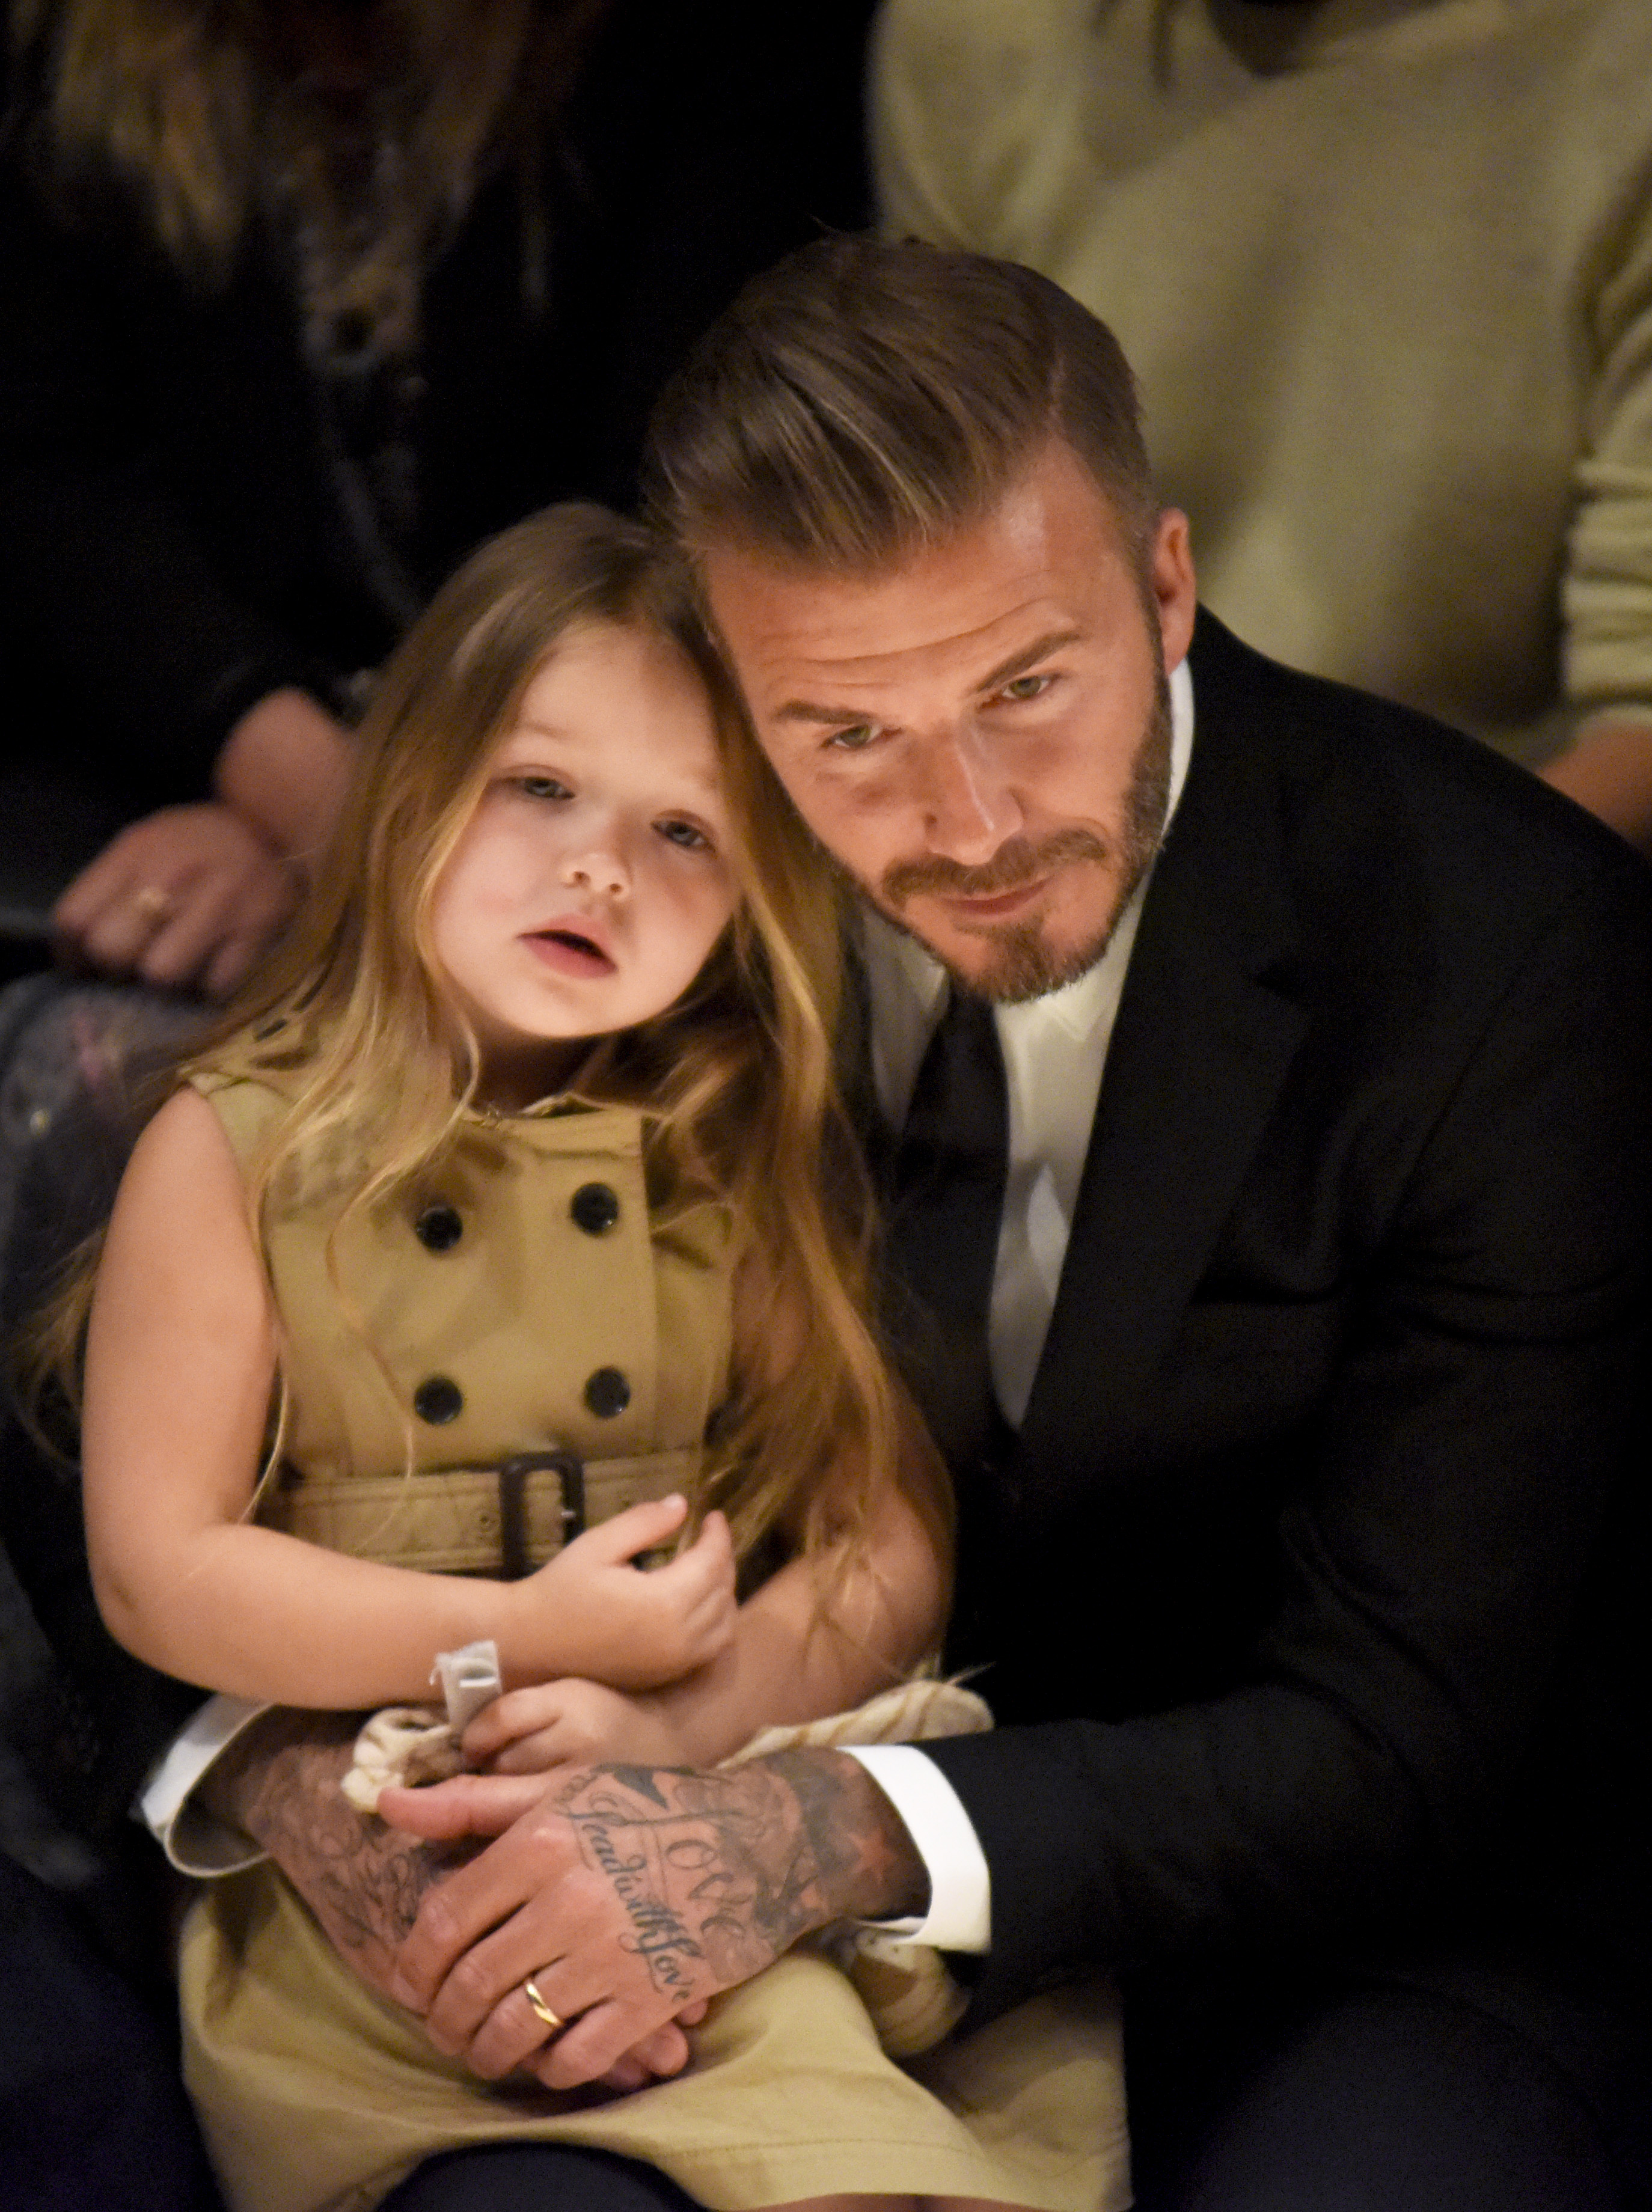 David Beckham with his daughter Harper at the Burberry "London in Los Angeles" event on April 16, 2015, in Los Angeles, California. | Source: Getty Images